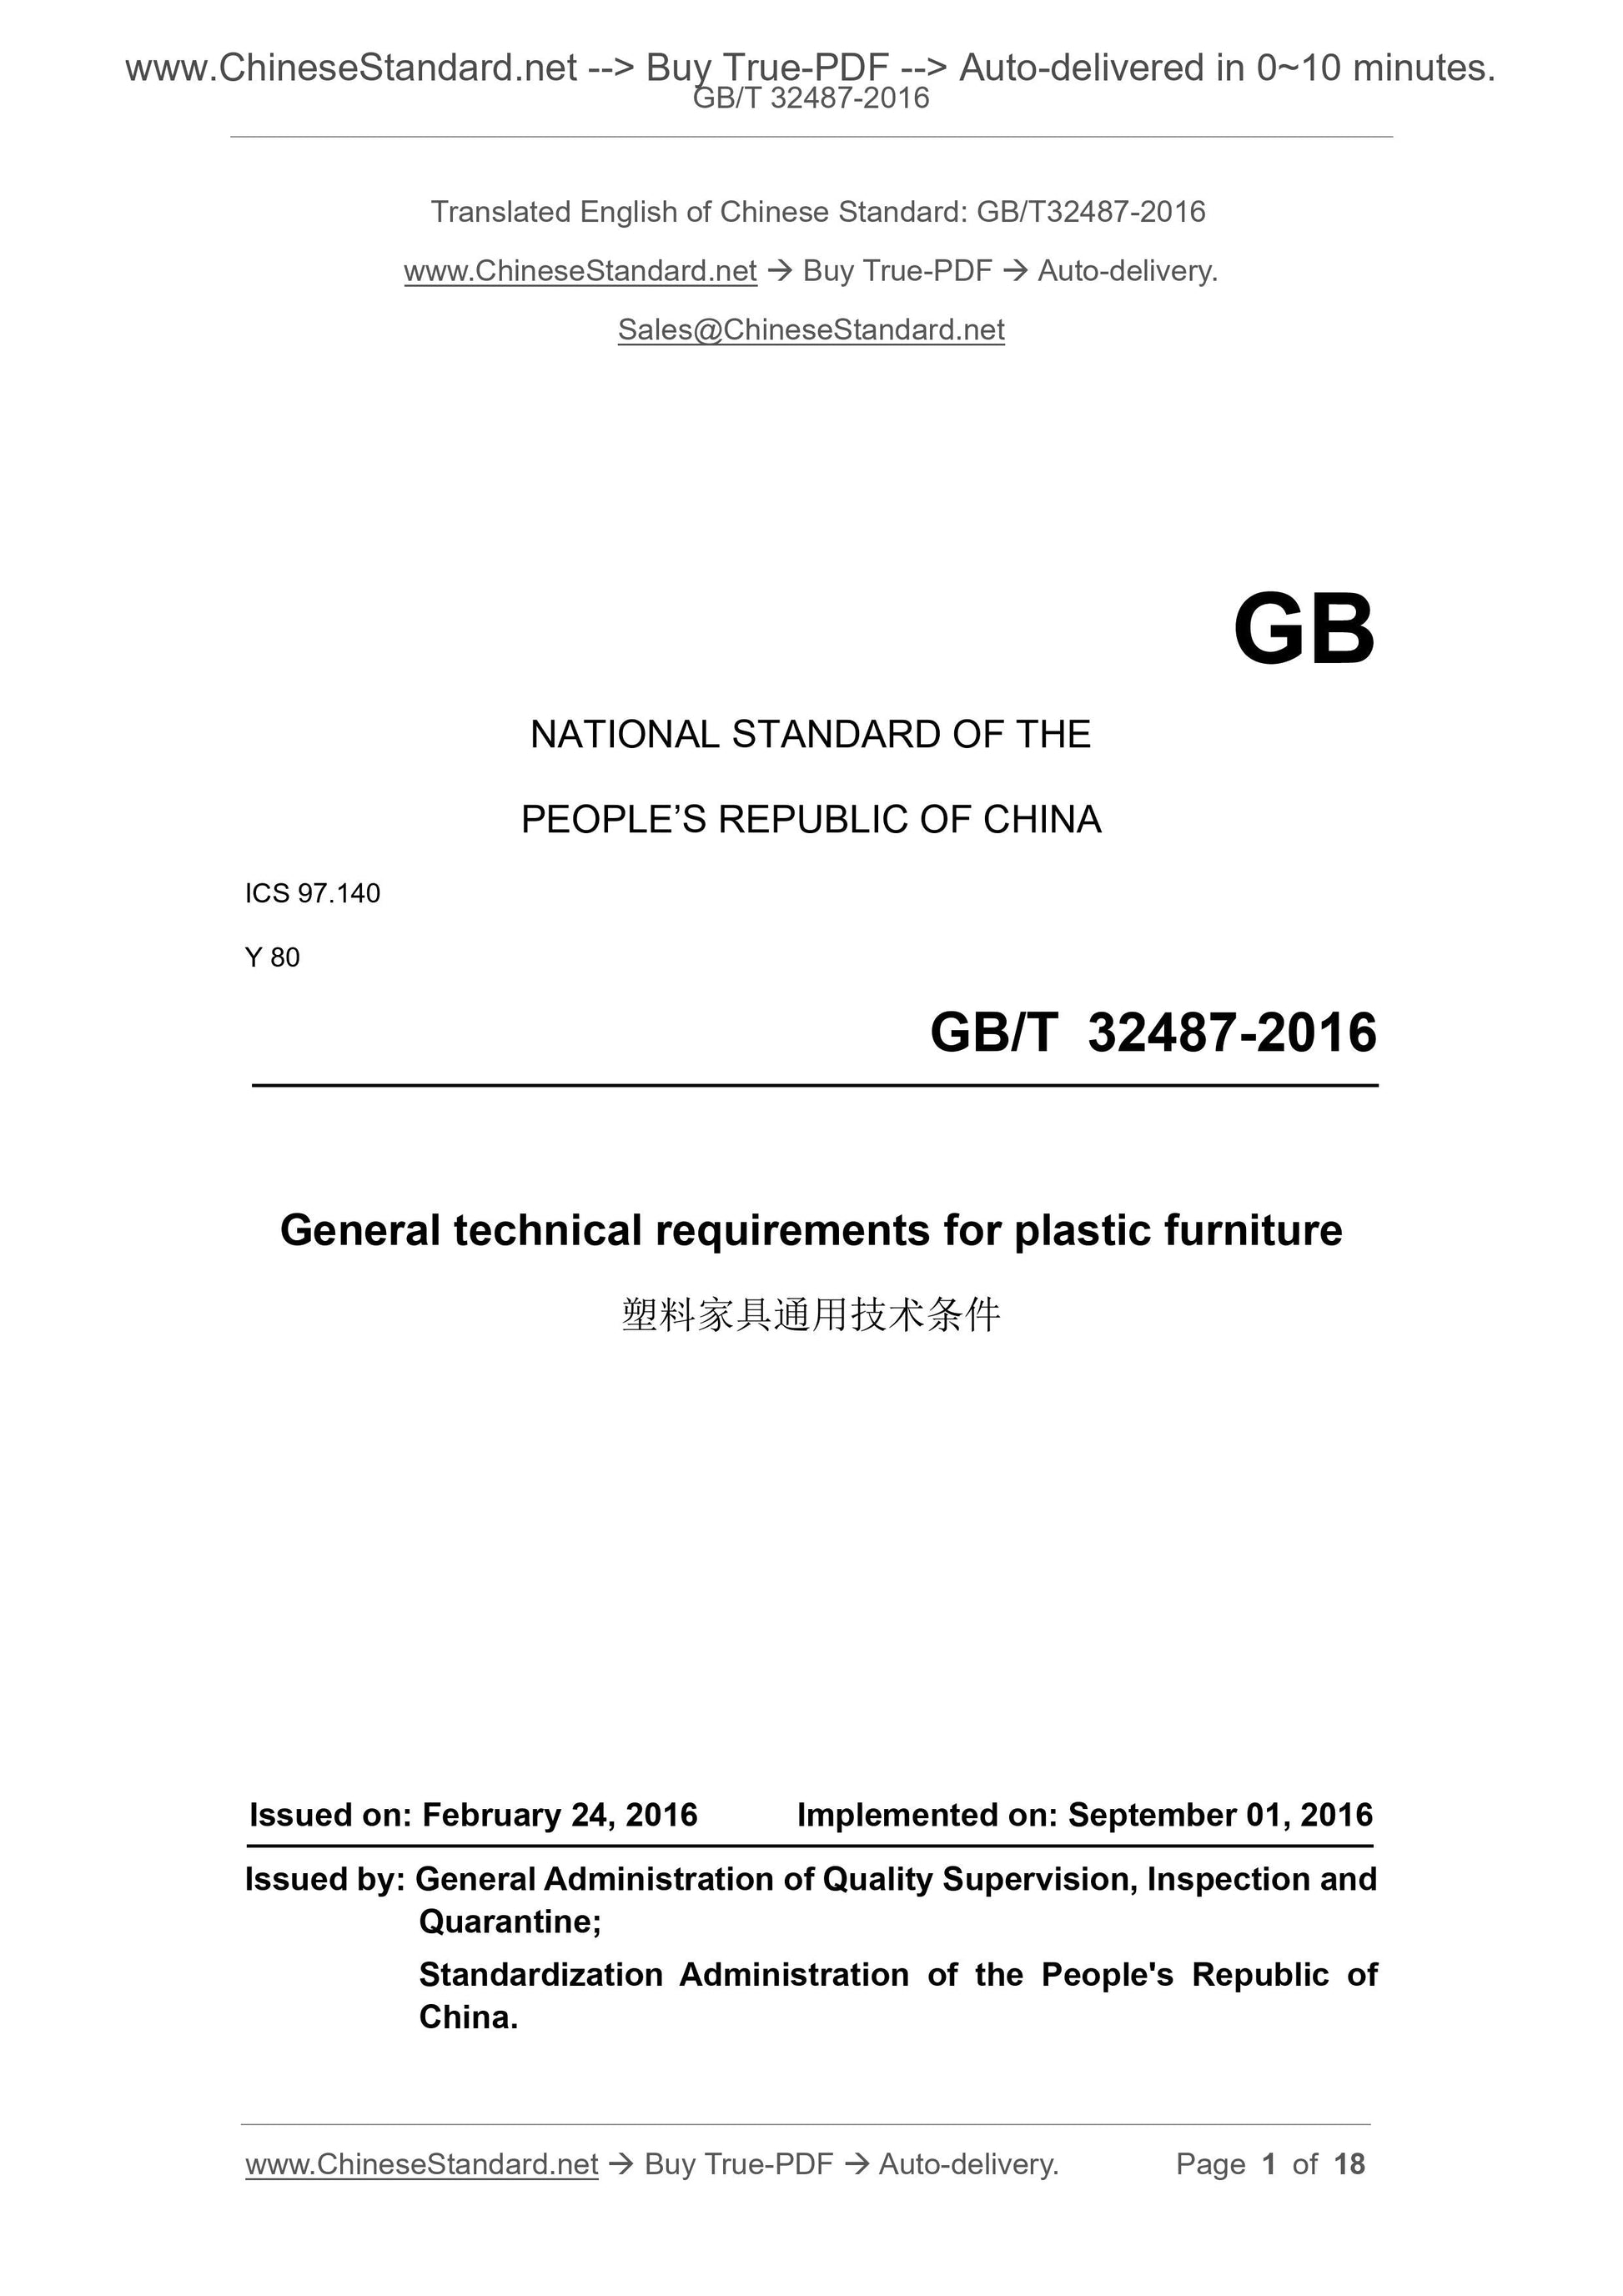 GB/T 32487-2016 Page 1